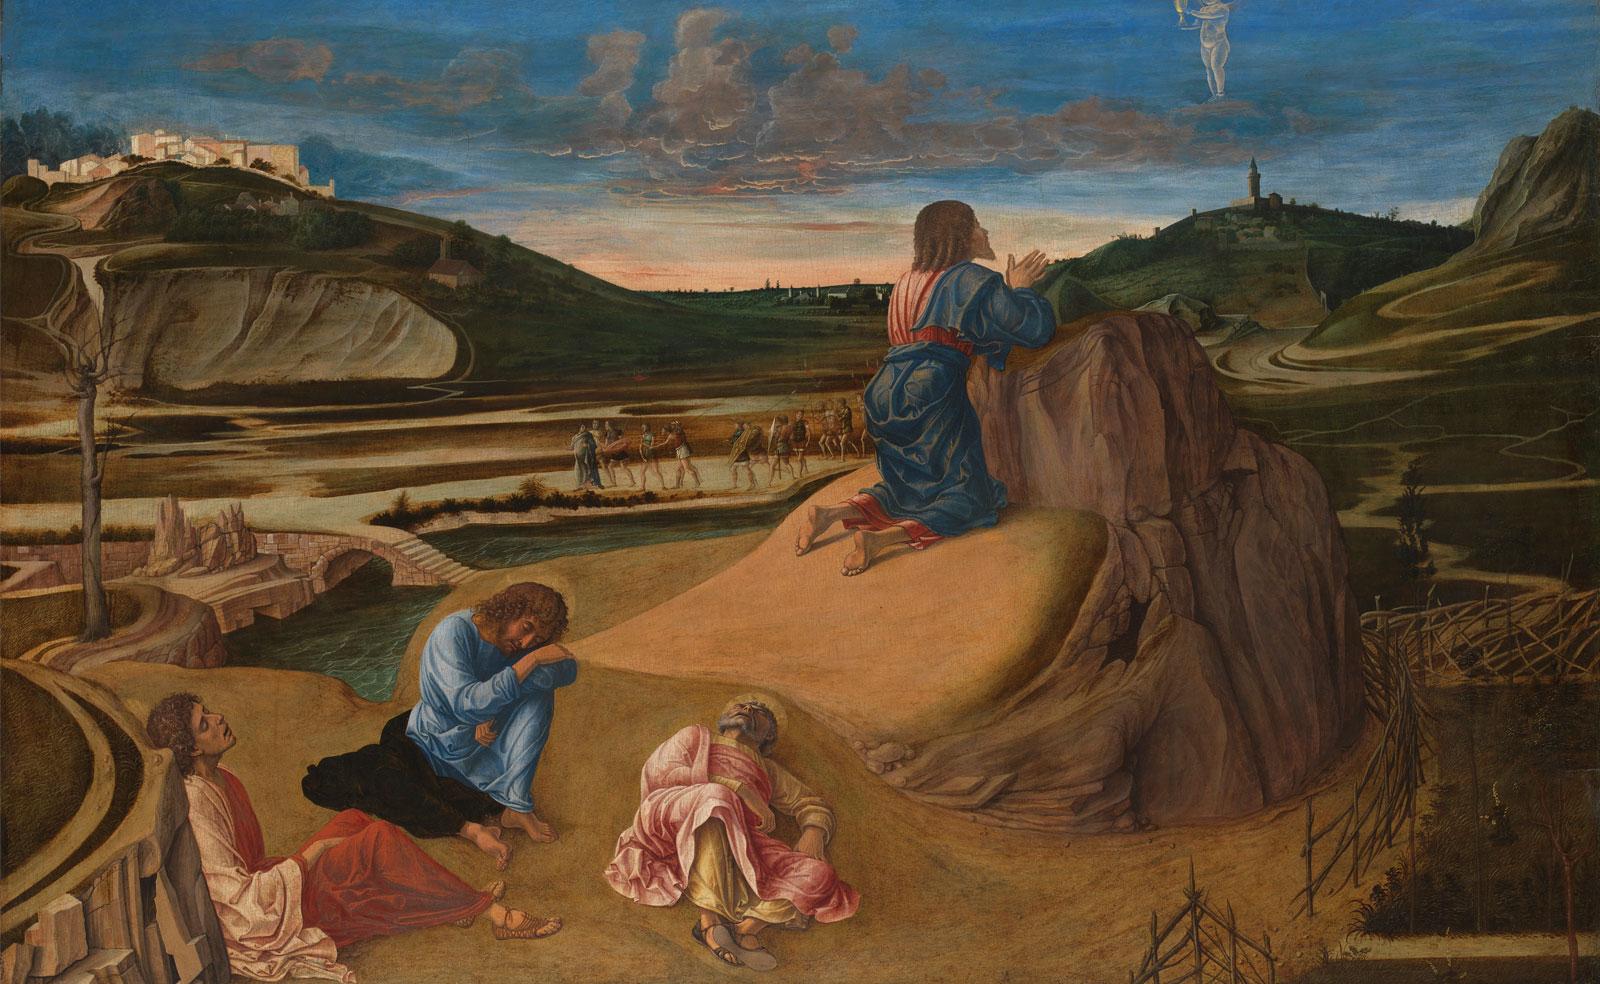 The Agony in the Garden by Giovanni Bellini.